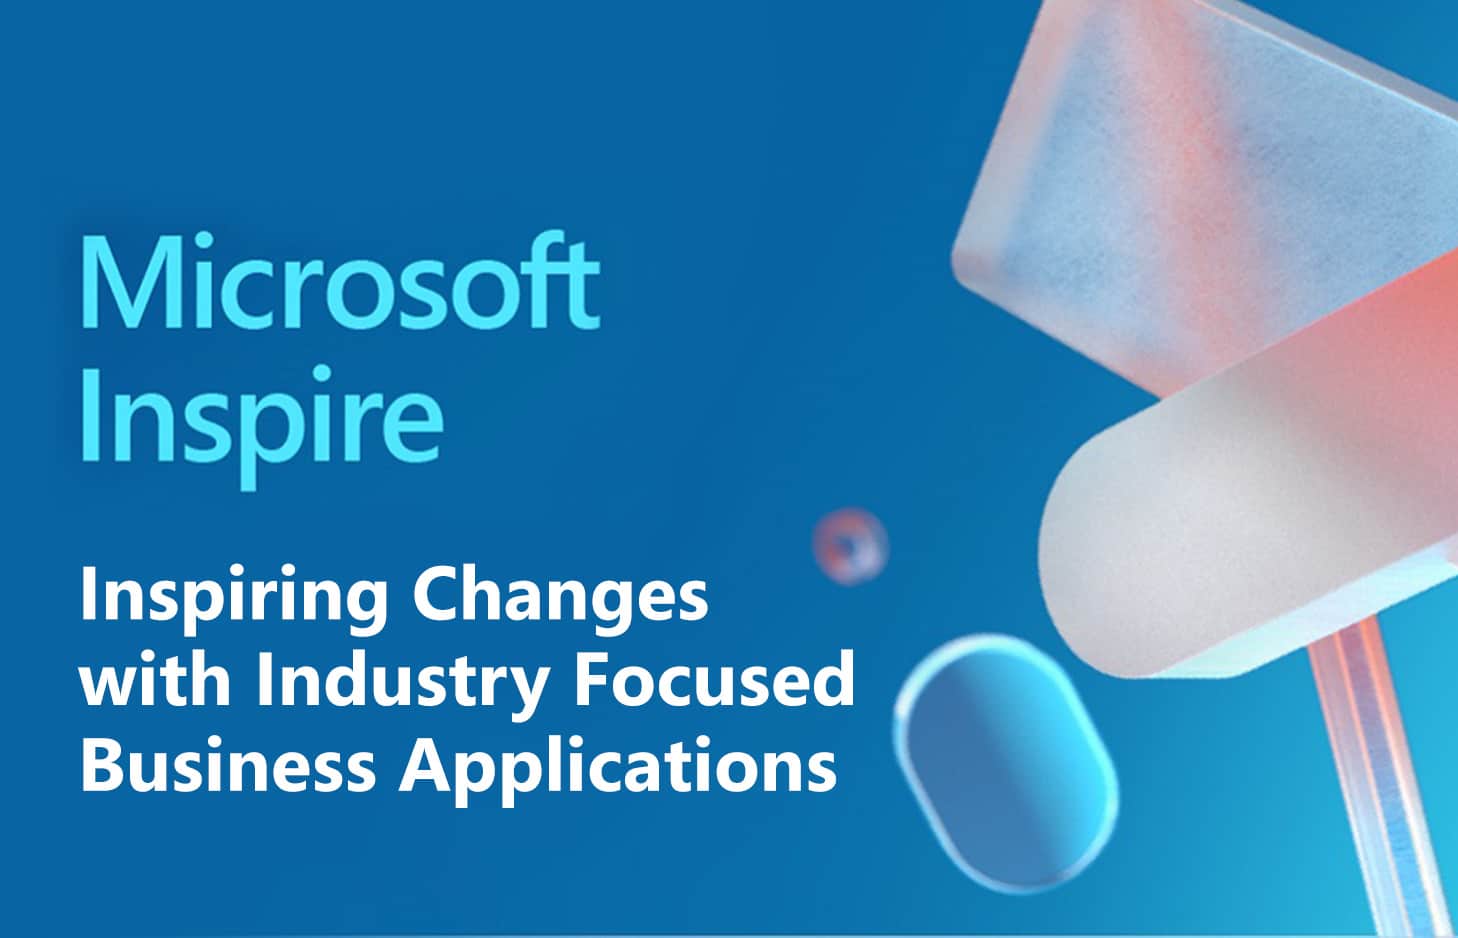 Inspiring Changes with Industry Focused Business Applications